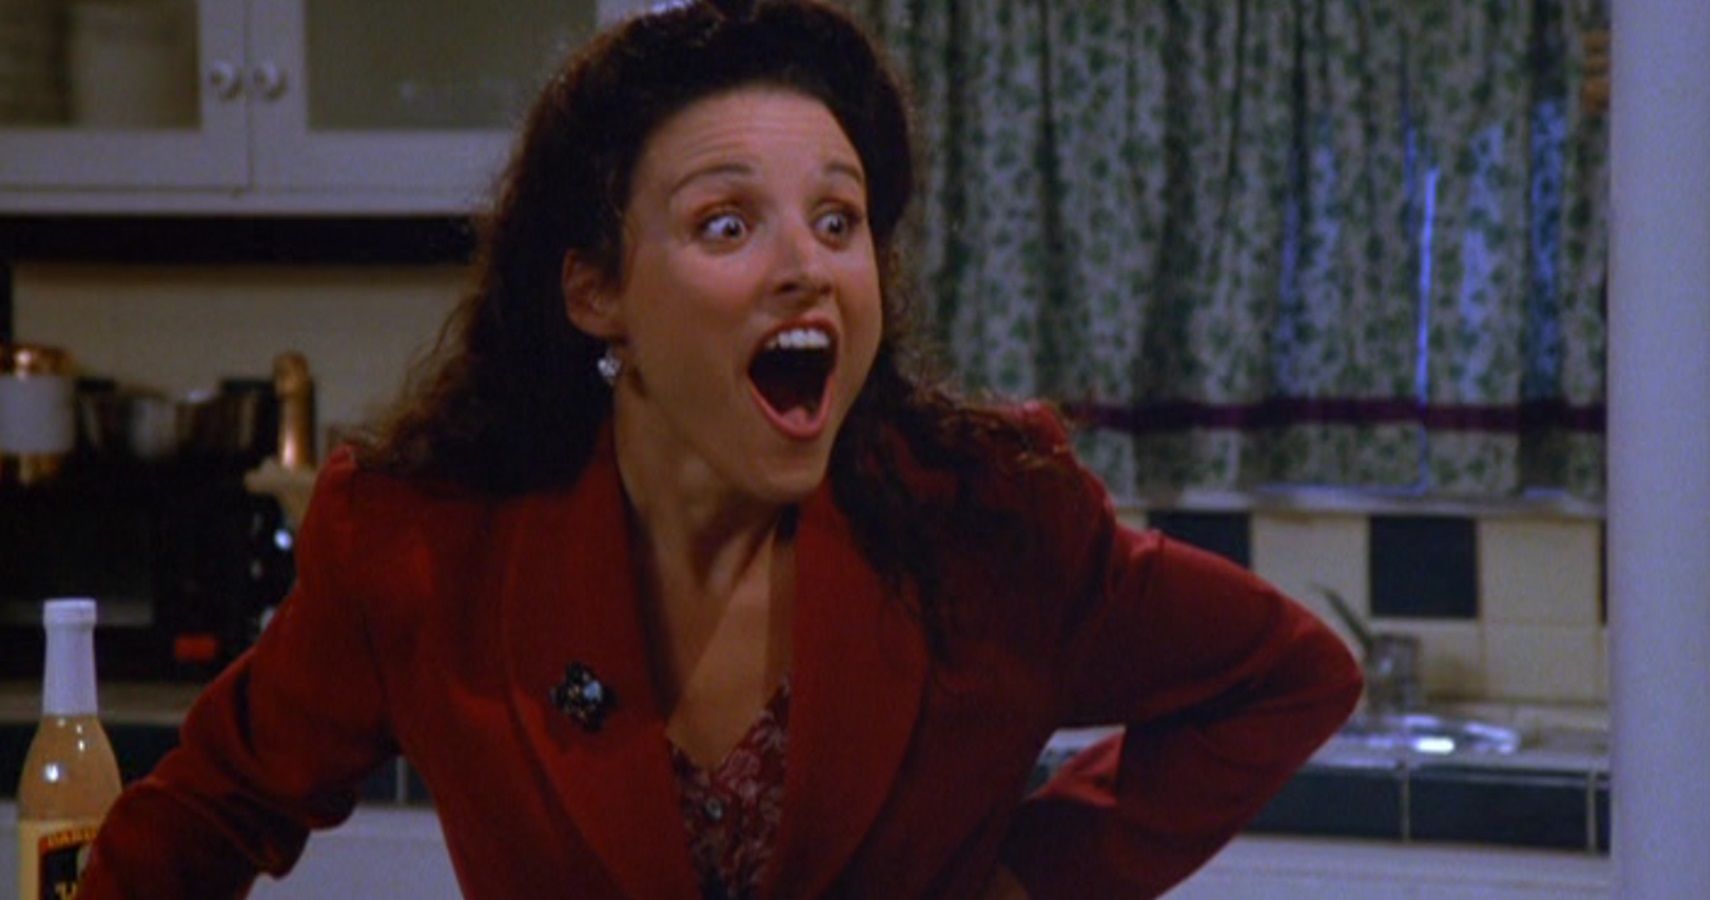 Elaine Benes gets upset over exclamation points